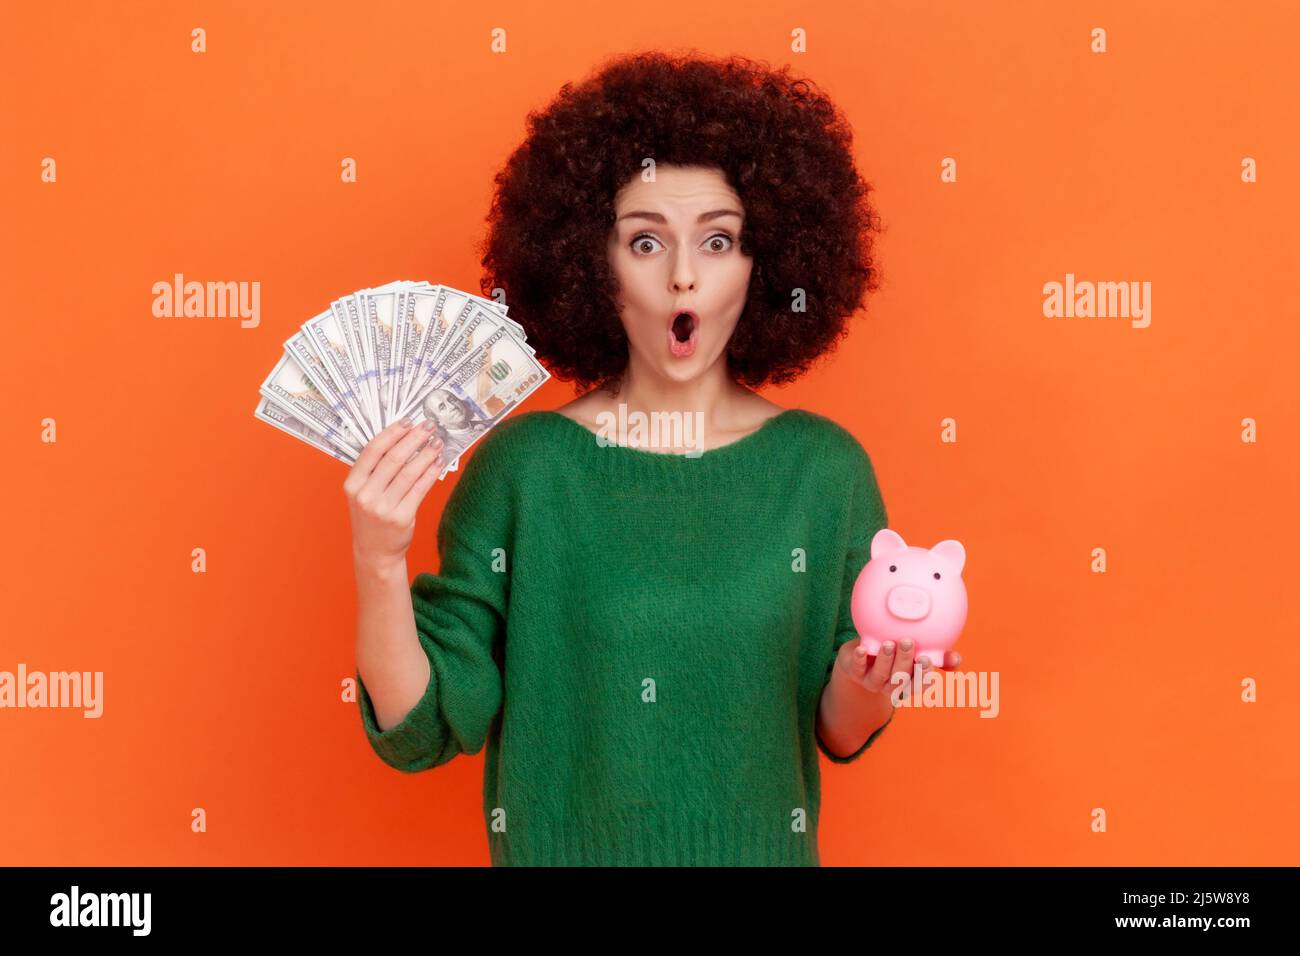 Surprised woman with Afro hairstyle in green sweater holding fan of dollars and piggy bank in hands, shocking conditions of financial investments. Indoor studio shot isolated on orange background. Stock Photo